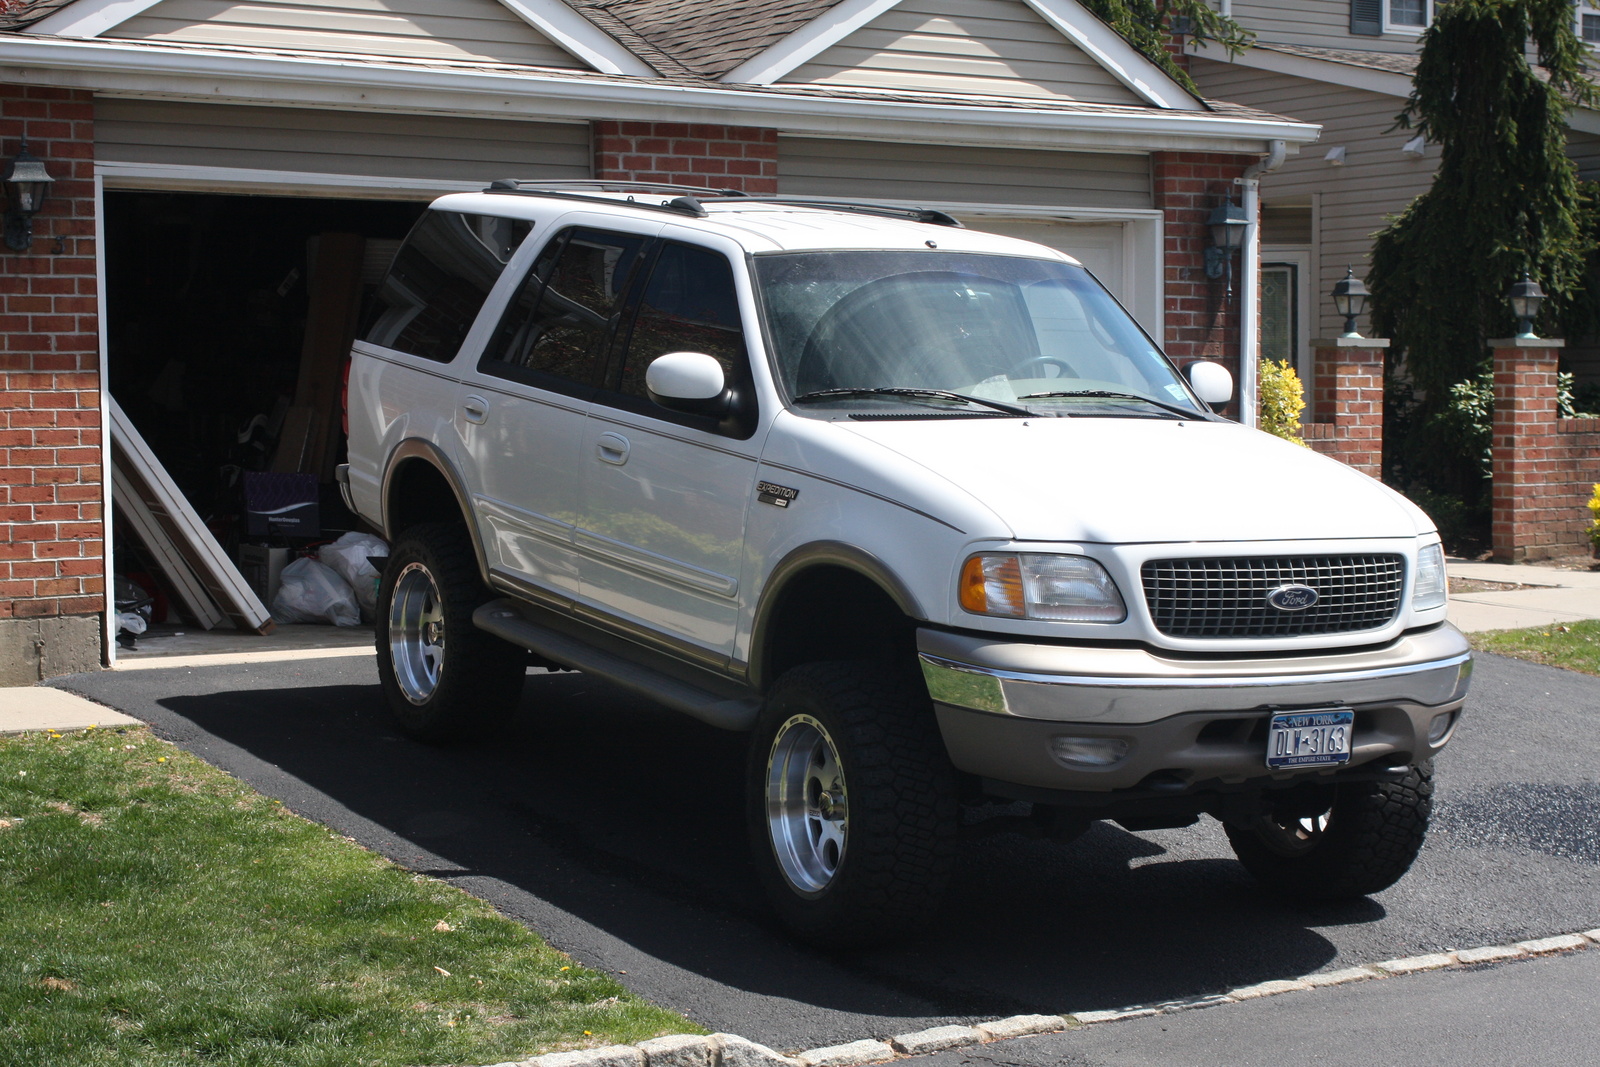 2001 Ford expedition horsepower #2